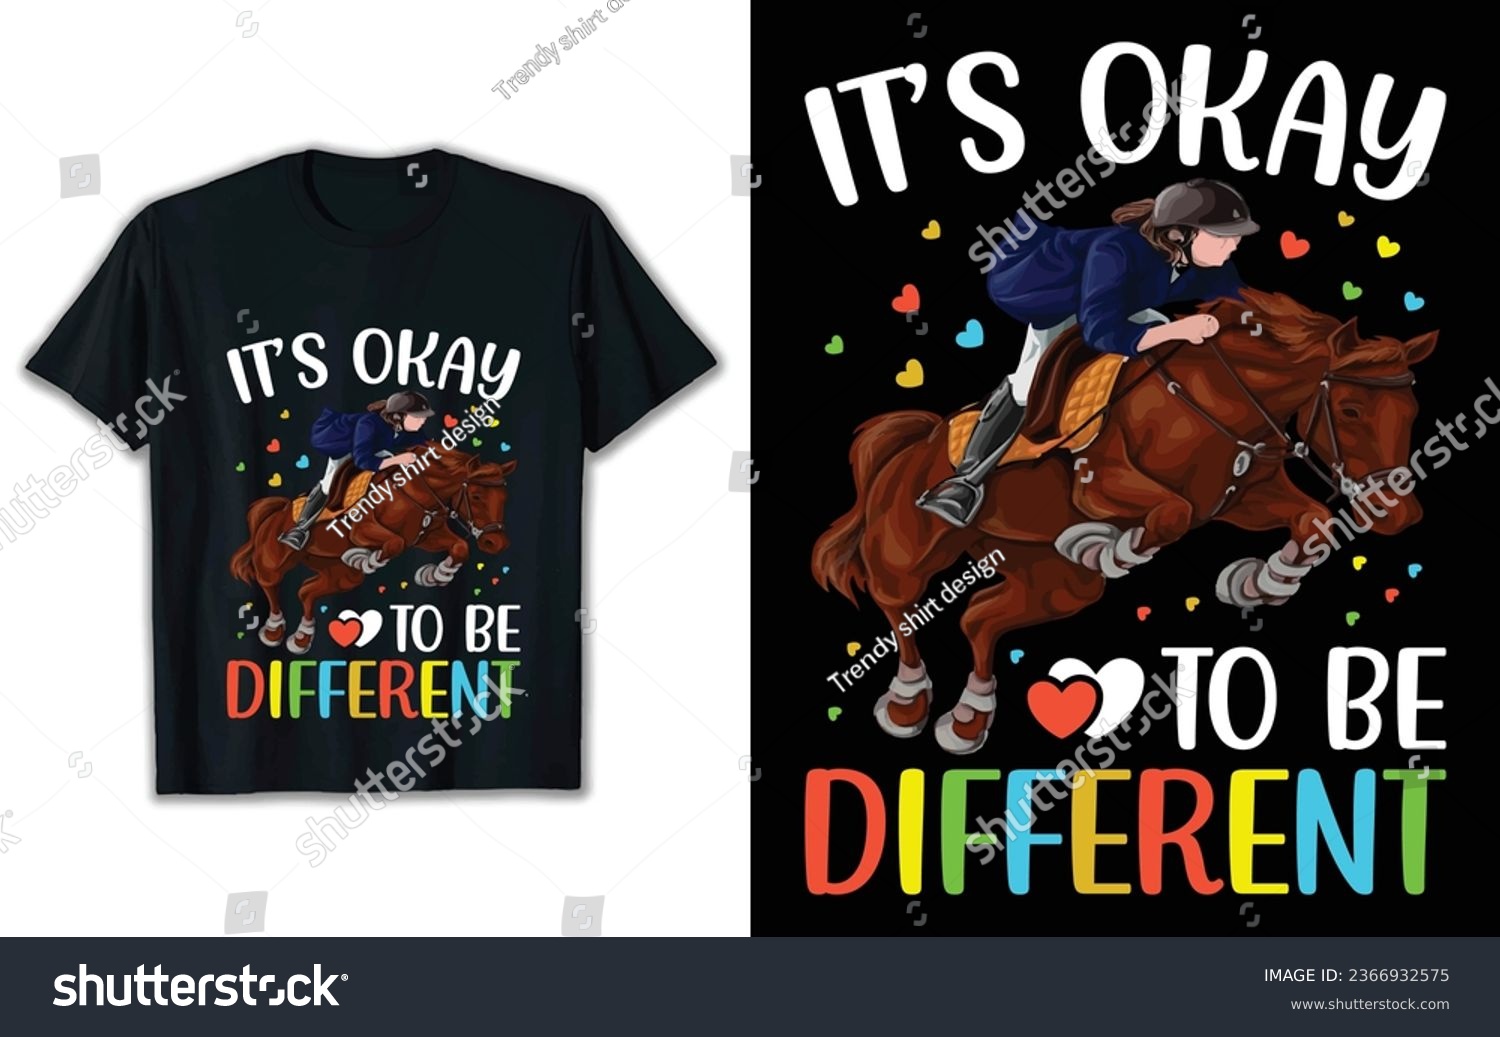 SVG of It's okay to be different t shirt design. svg